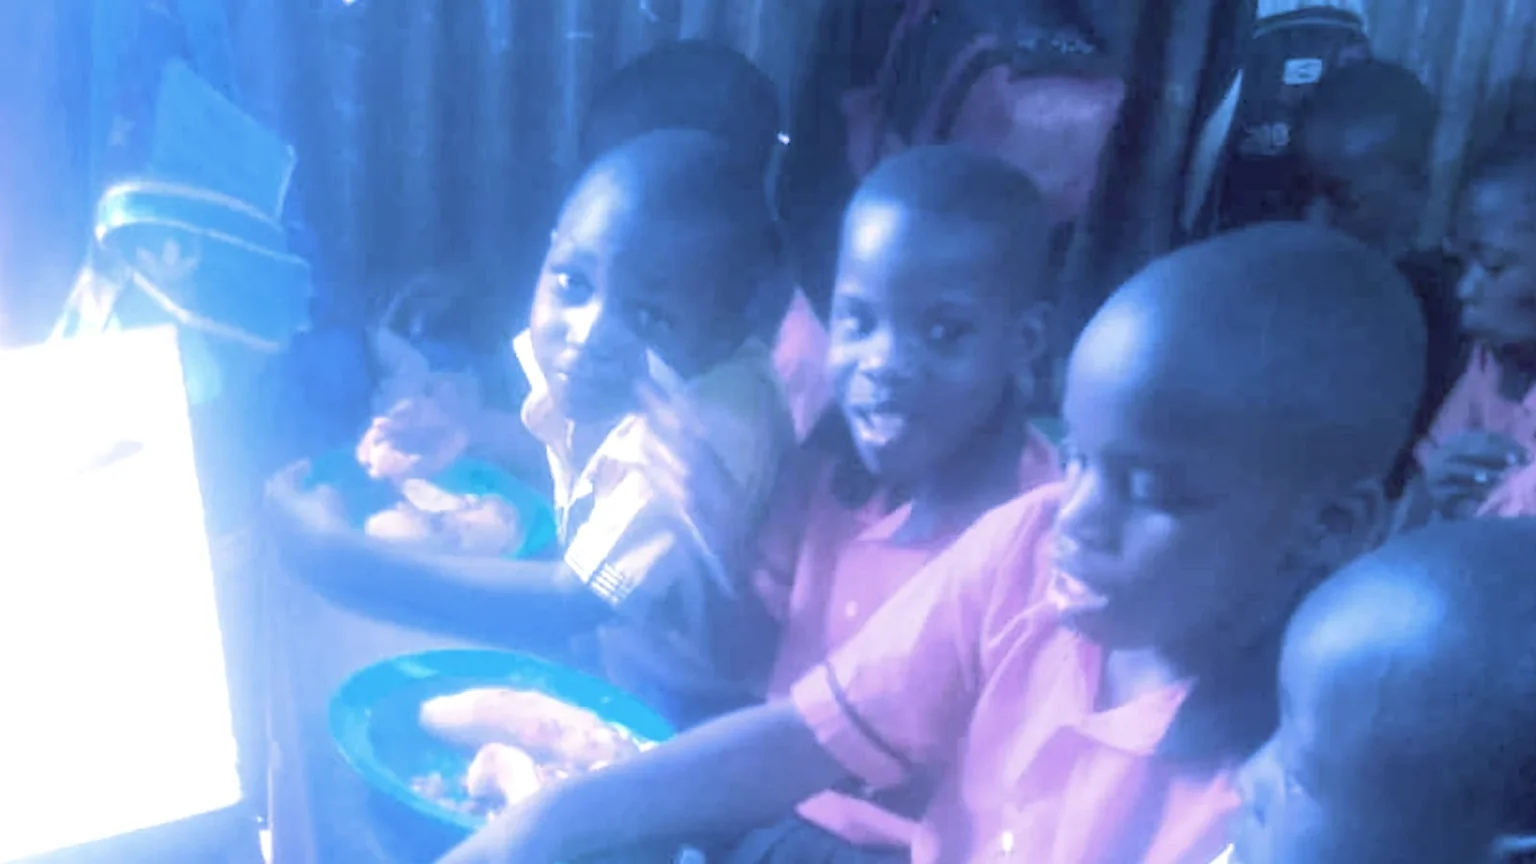 Kids from Vision Christian Schoo. Courtesy of Noah Kwagala, Director of Vision Christian School